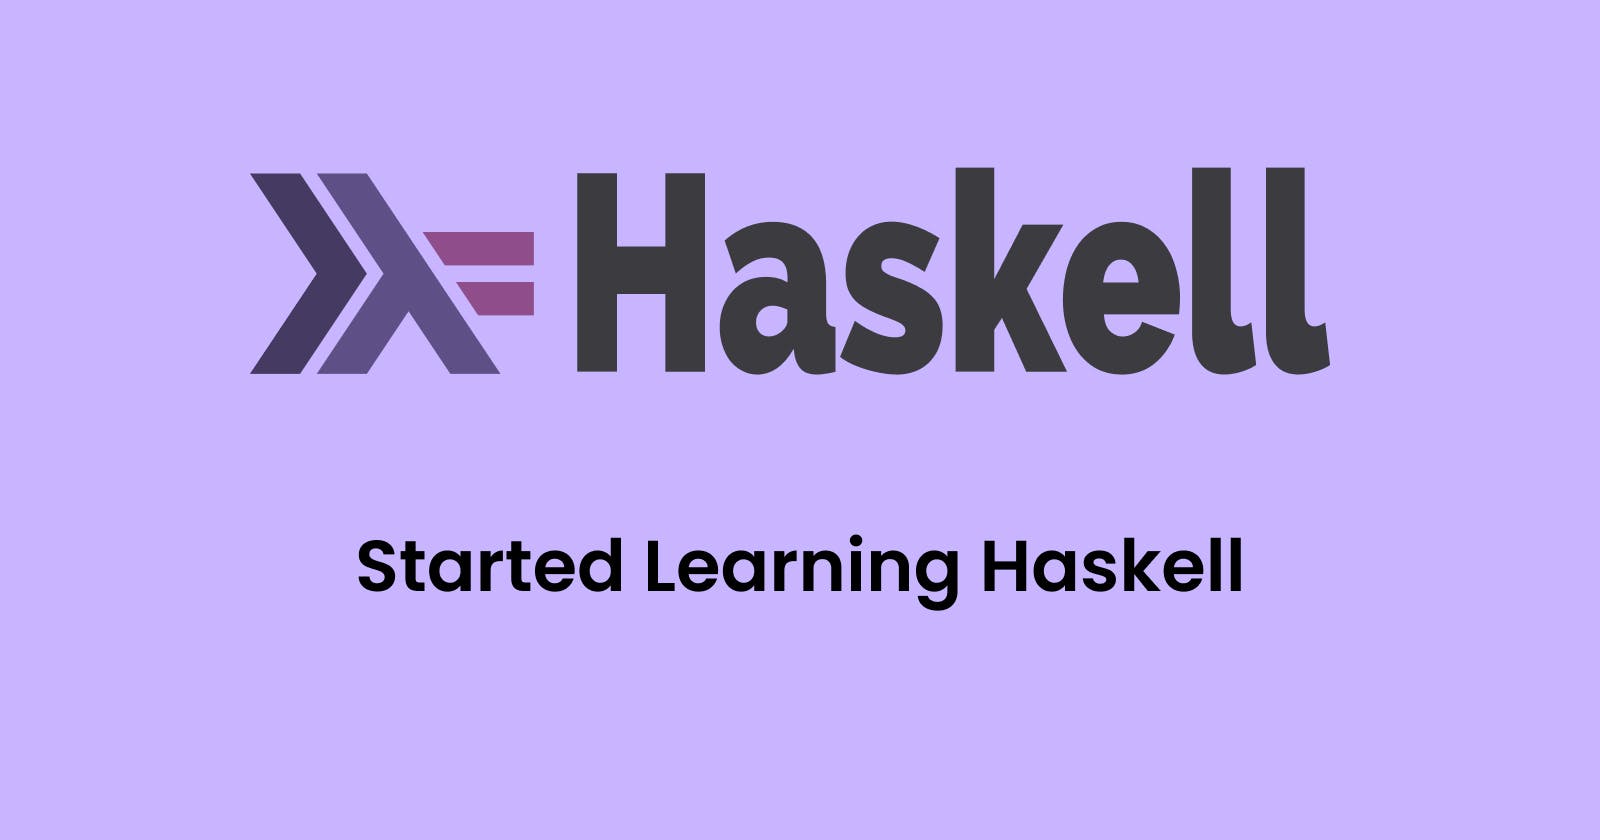 Started Learning Haskell